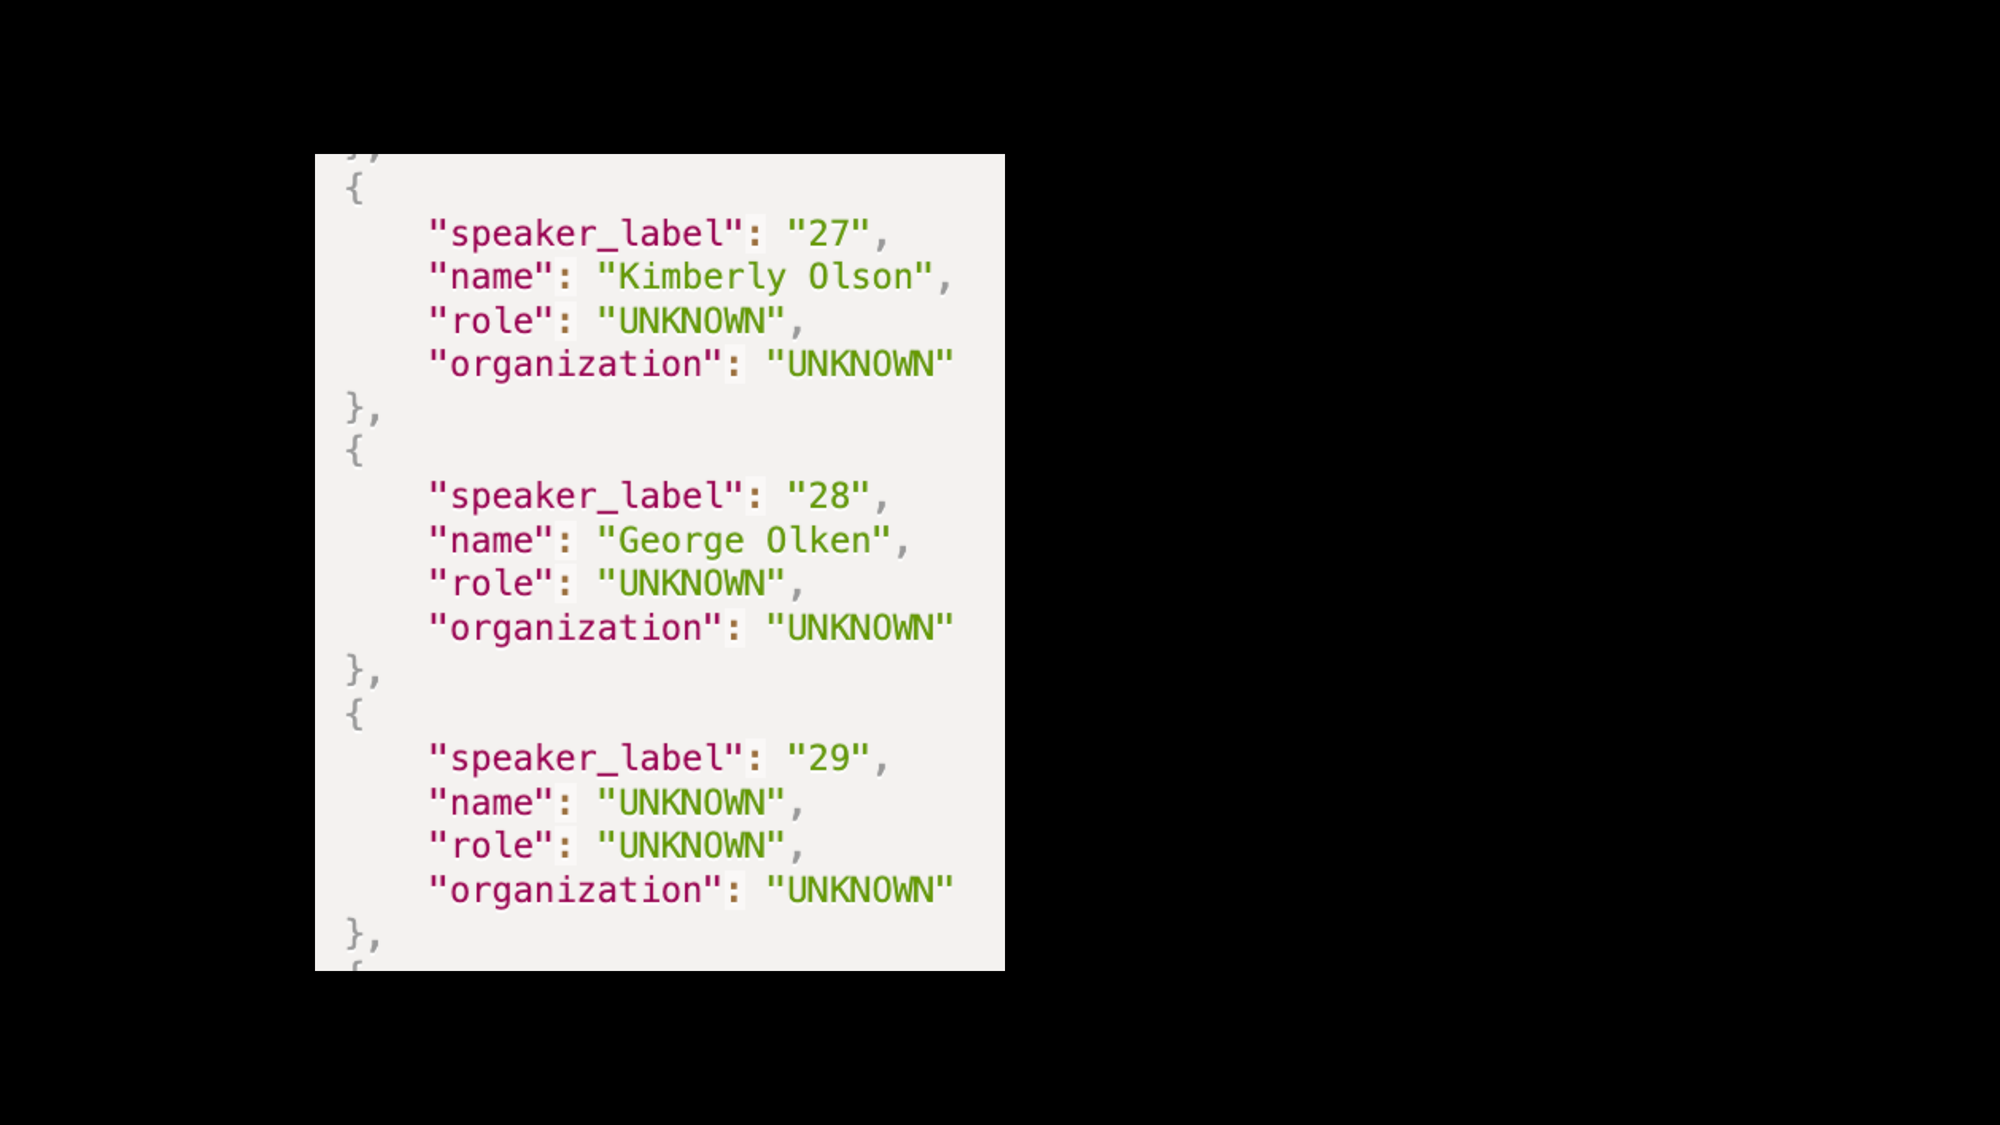 A JSON list of three identified speakers with fields speaker_label, name, role, and organization.